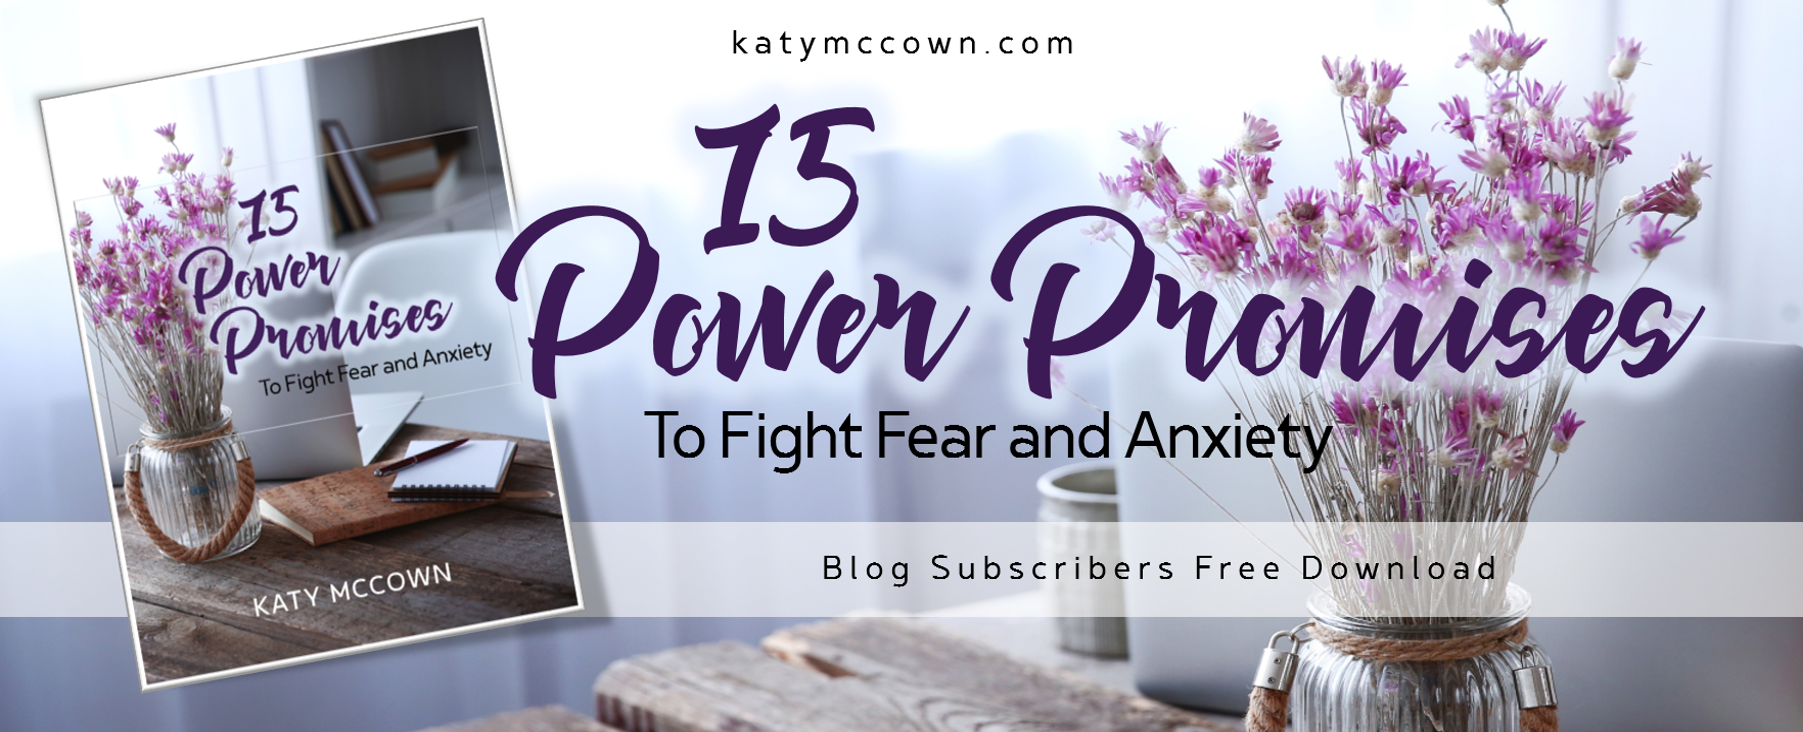 15 Power Promises to Fight Fear and Anxiety by Katy McCown.